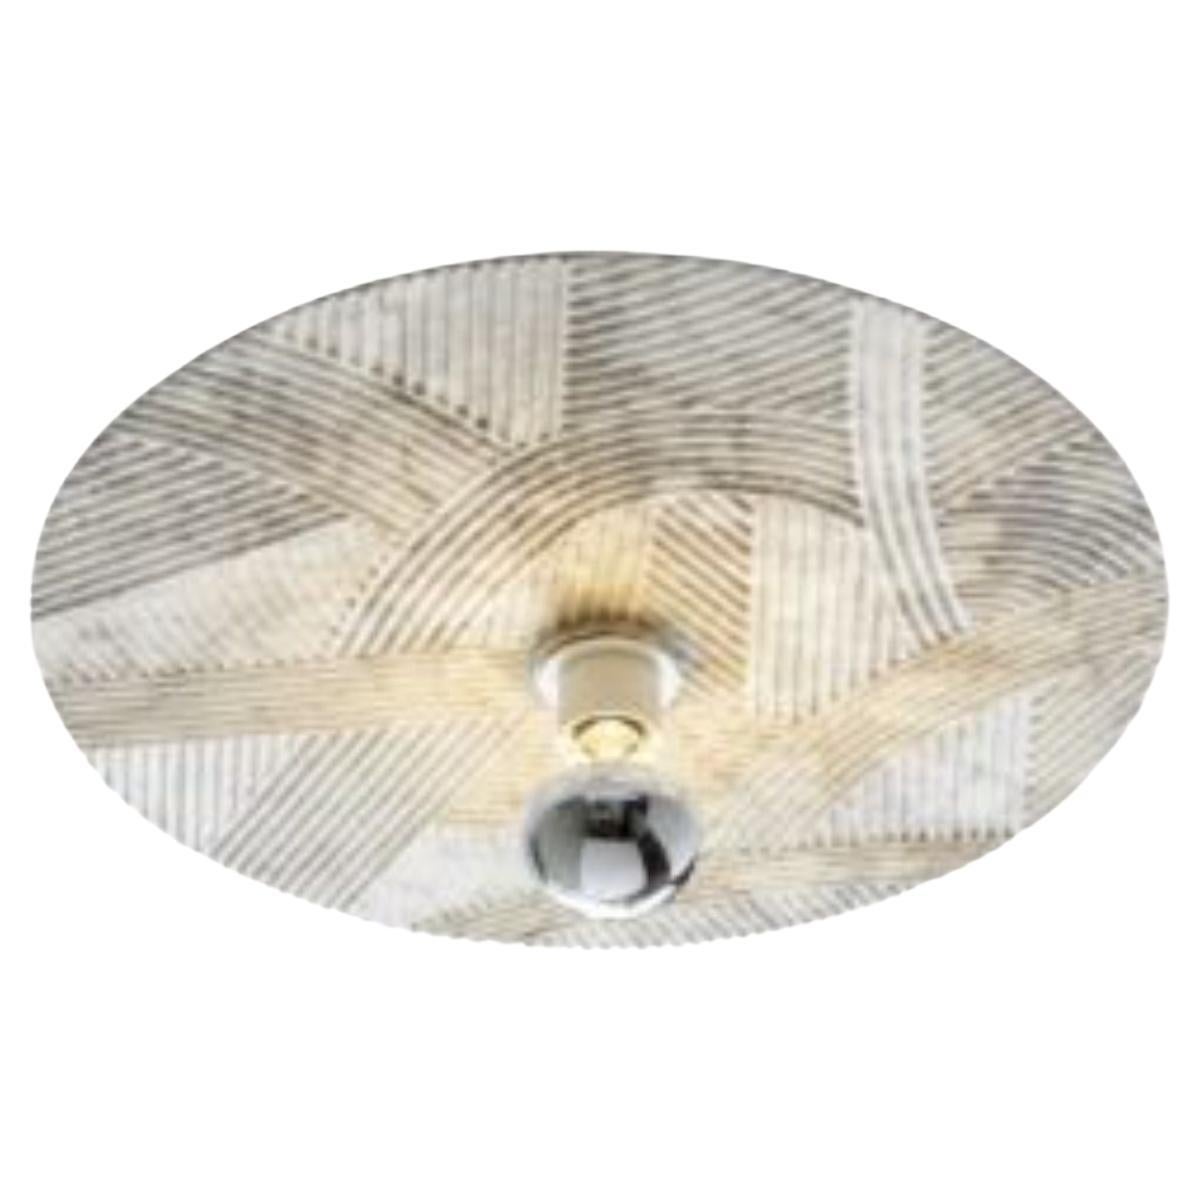 Solco Ceiling Light by Radar For Sale